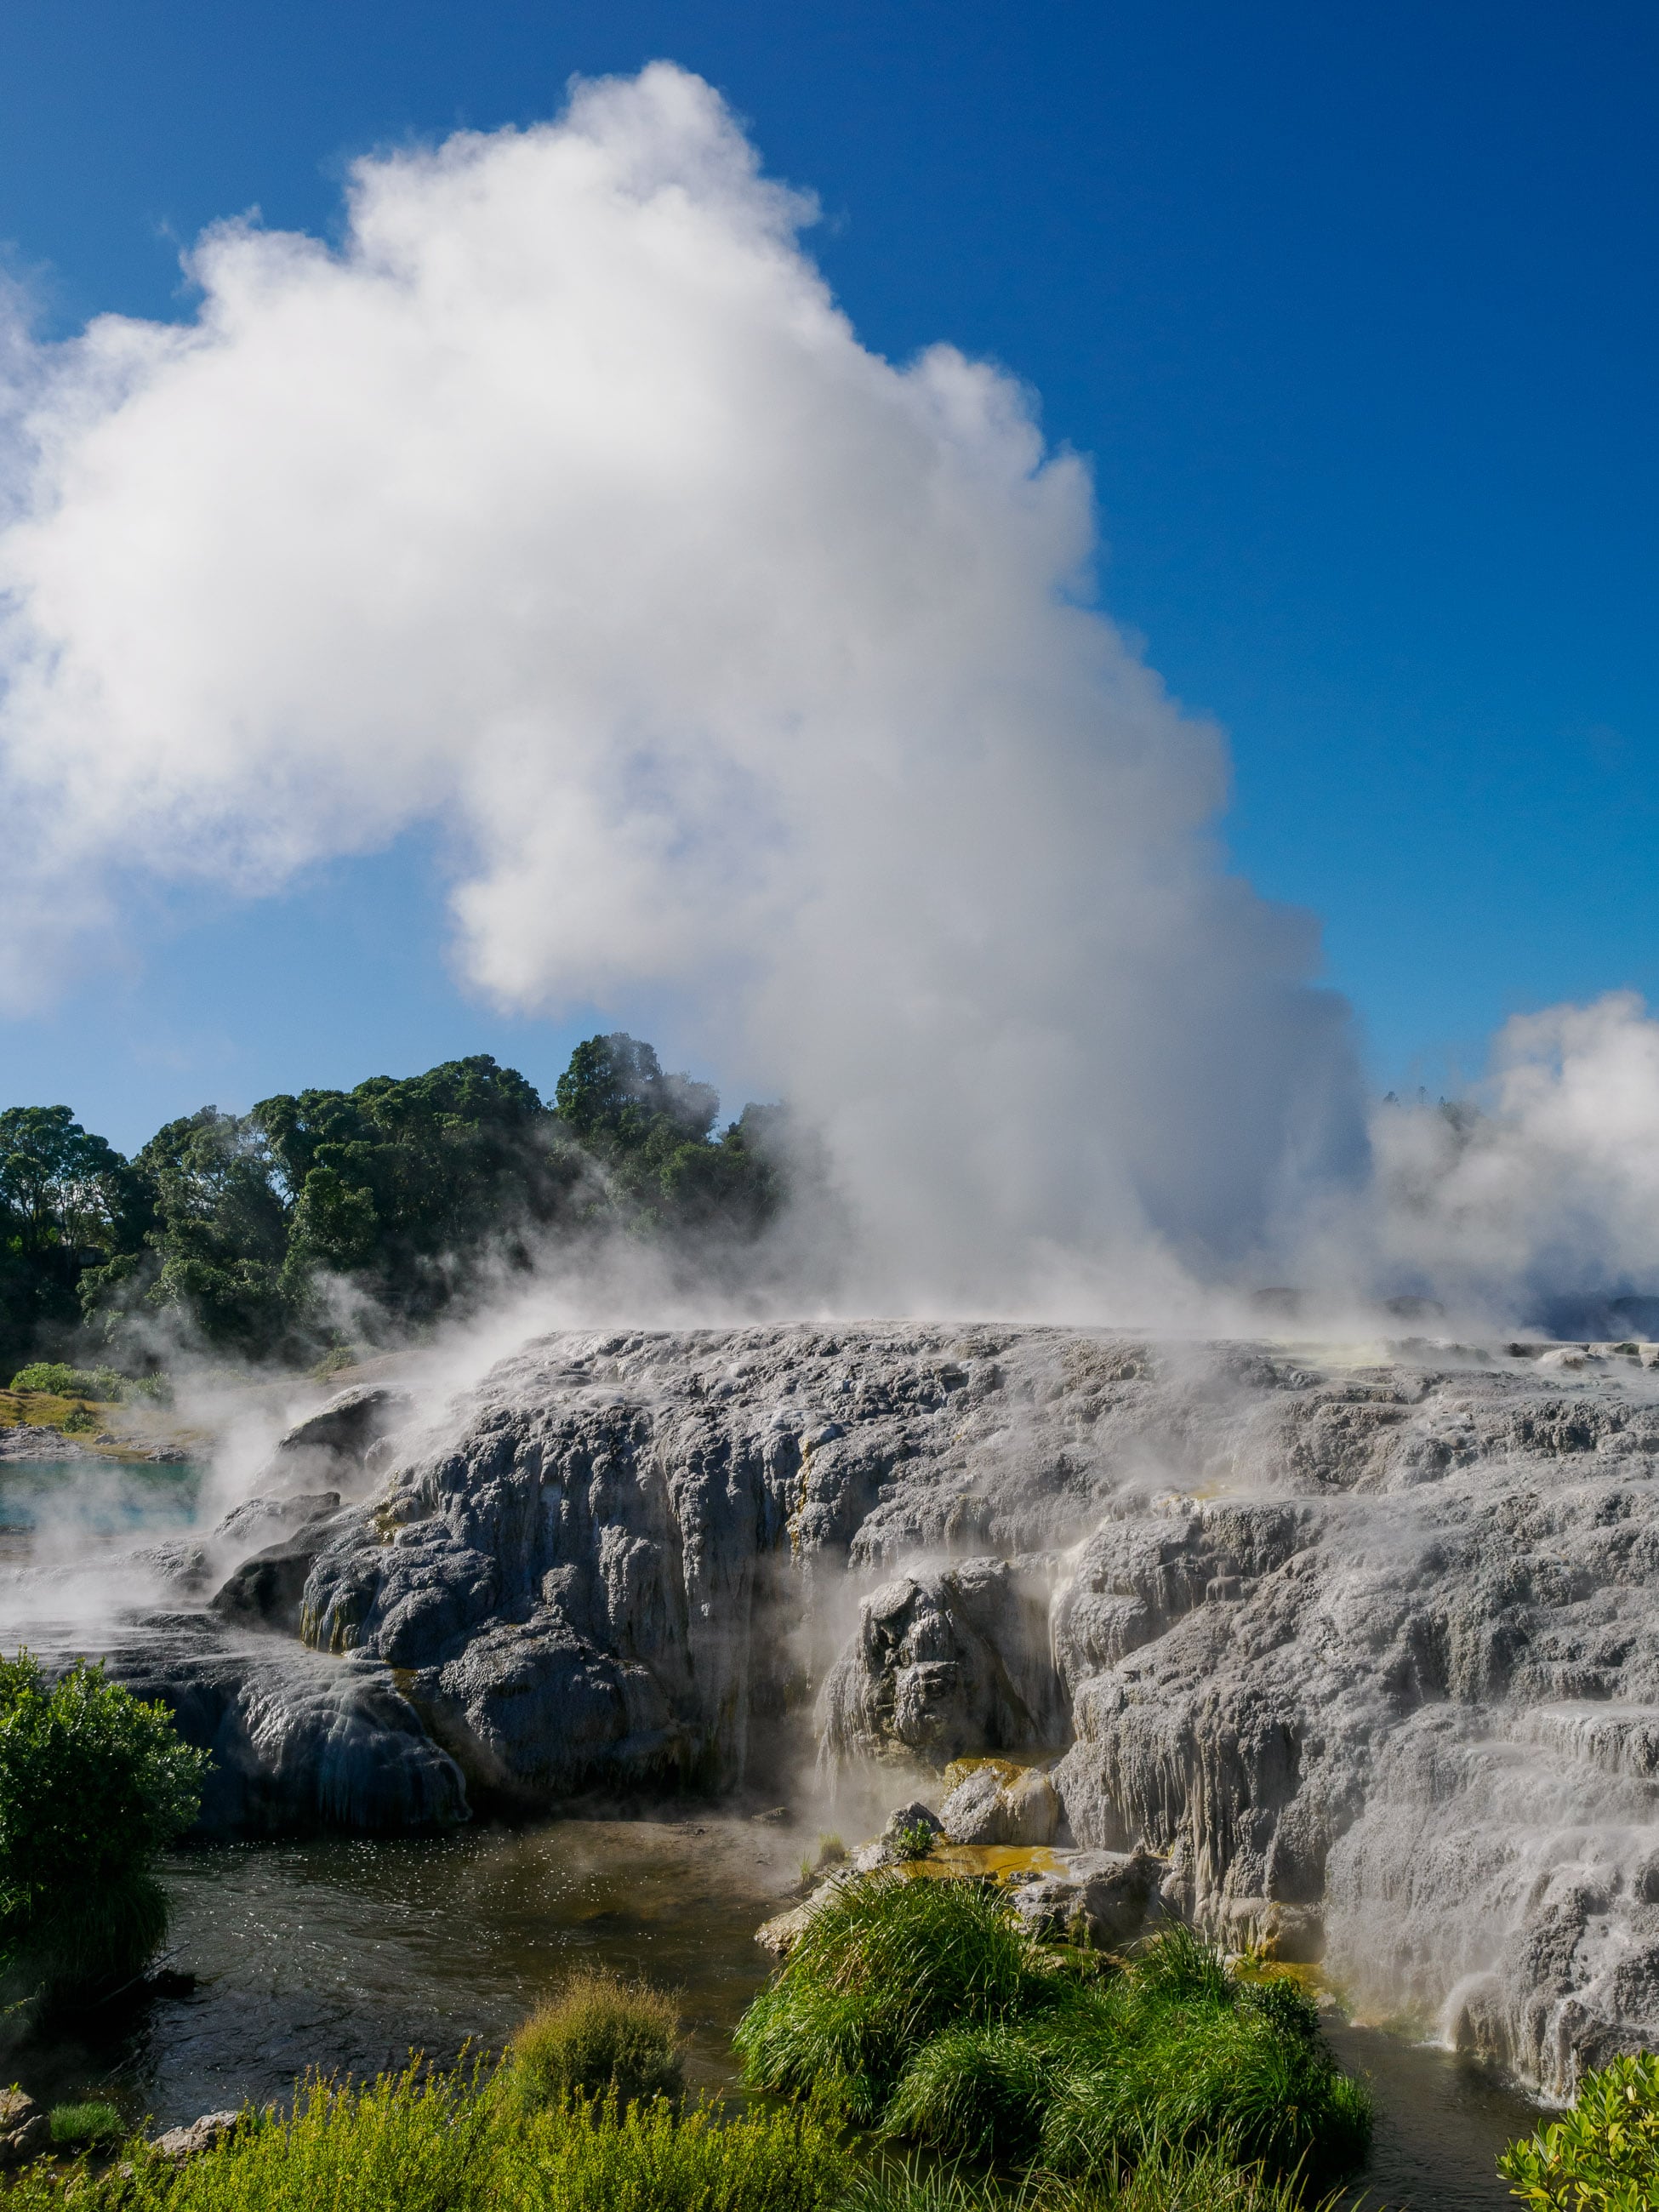 White geyser of water and steam rising up like a plume from gray rock into blue sky